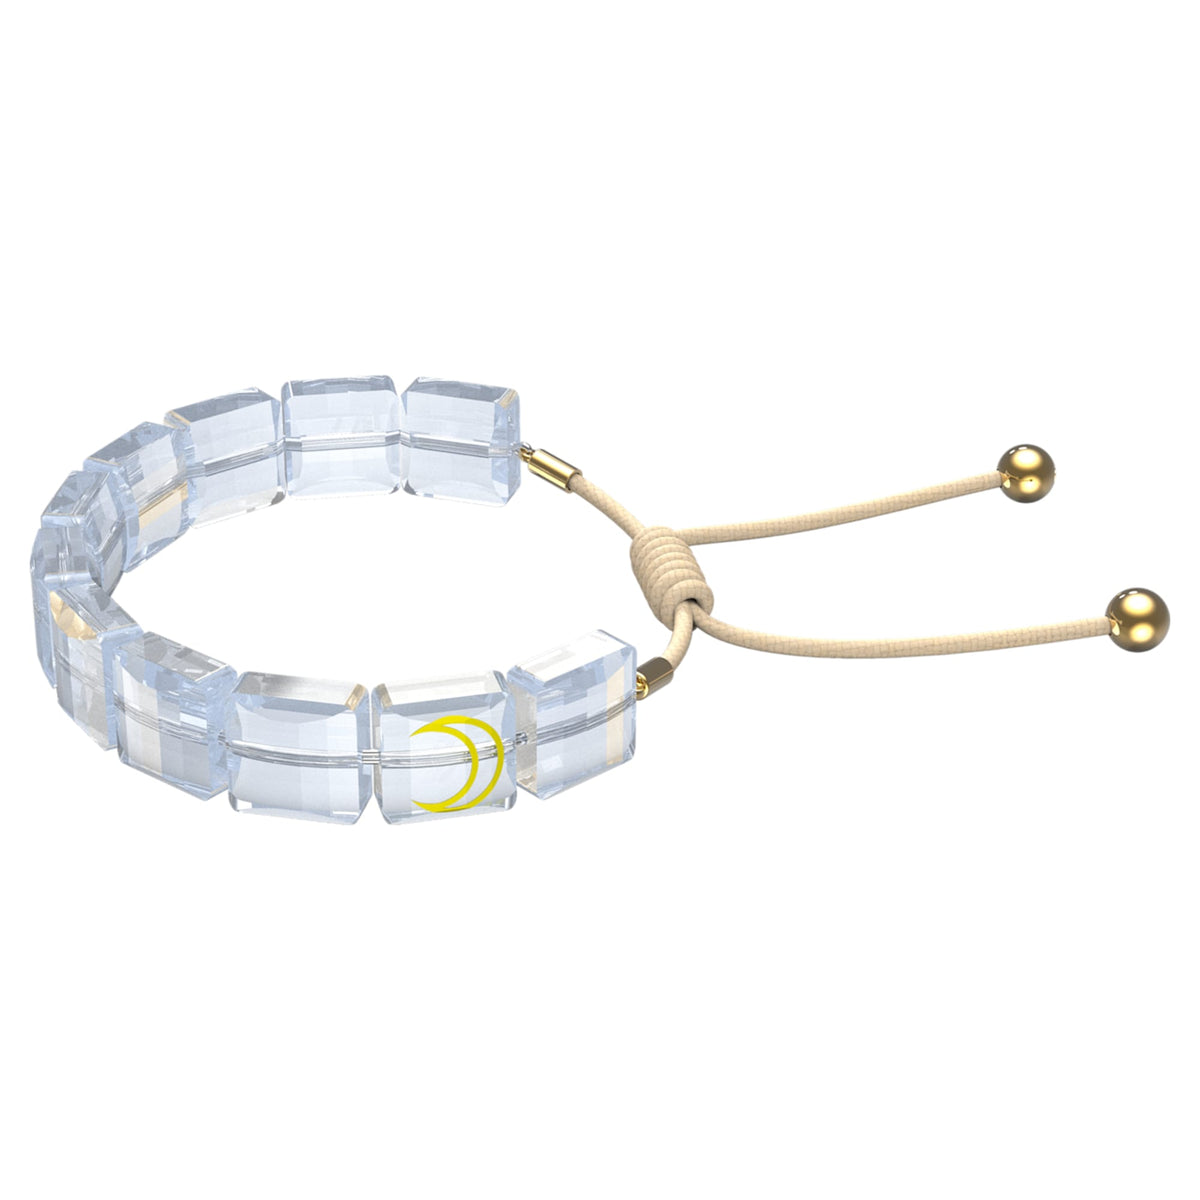 Swarovski Letra bracelet Moon, White, Gold-tone plated 5615863 - Limited Edition- Discontinued